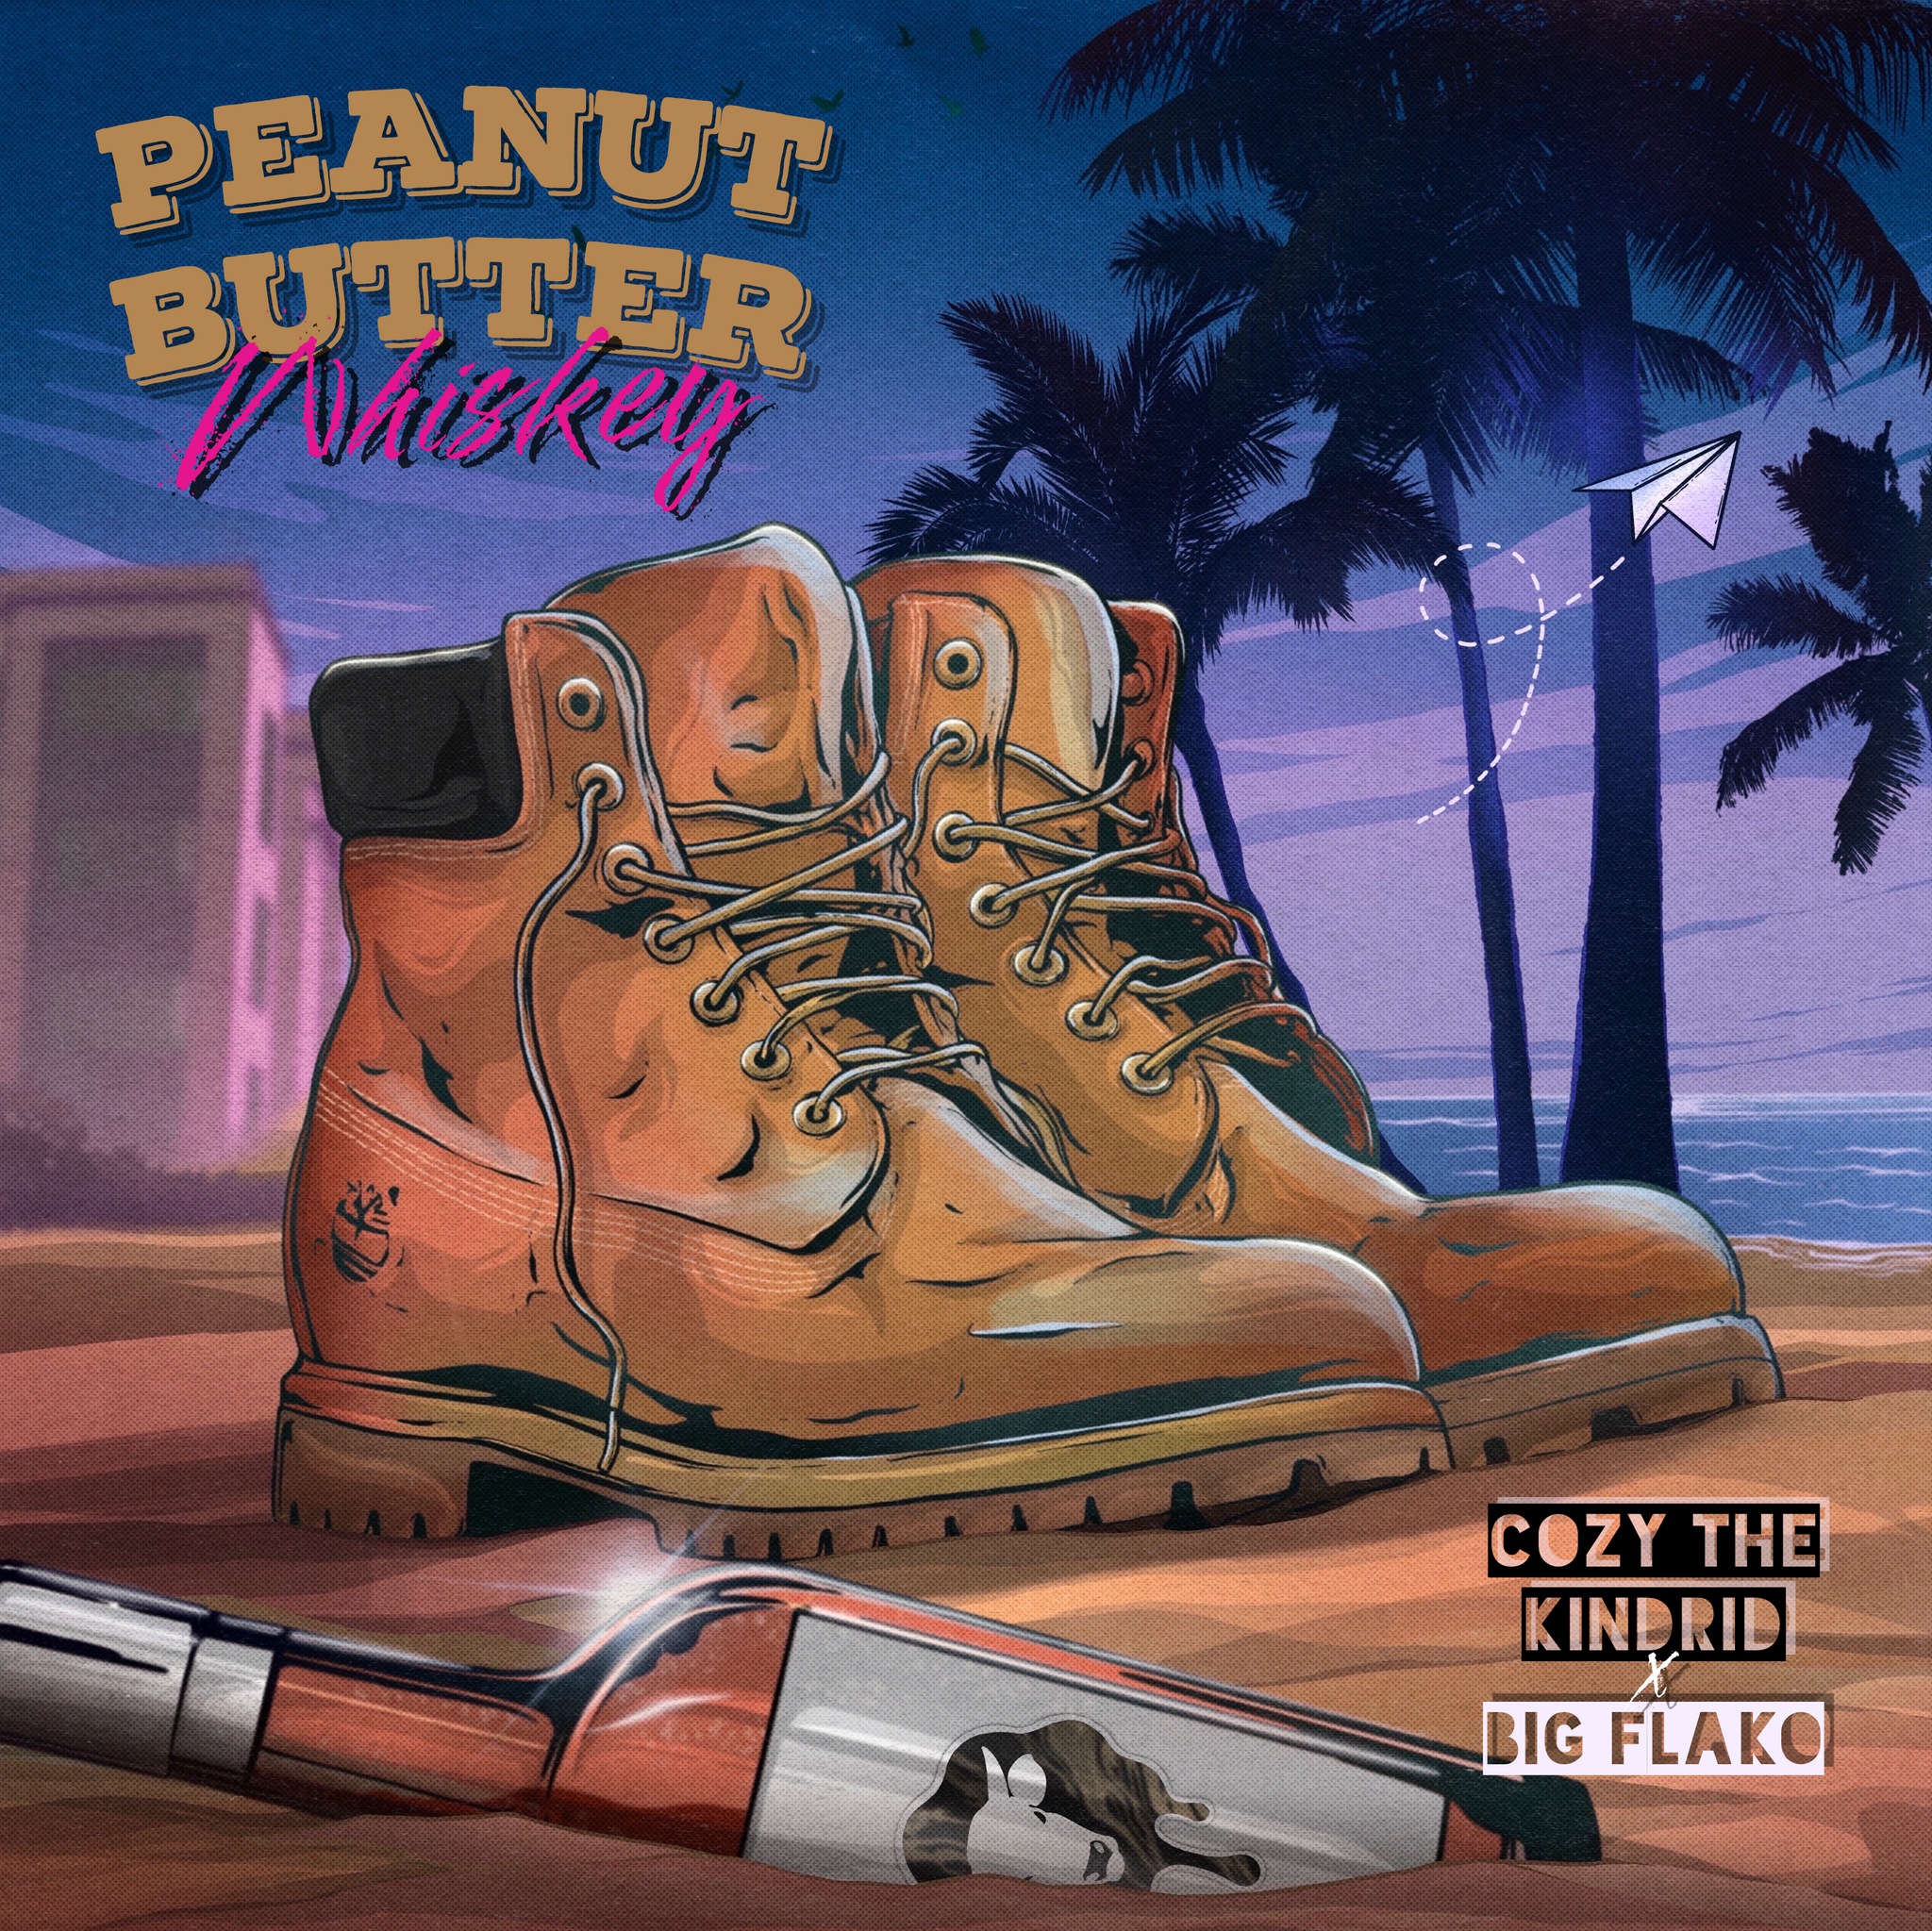 Peanut Butter Whiskey by BIG FLAKO and COZY THE KINDRID